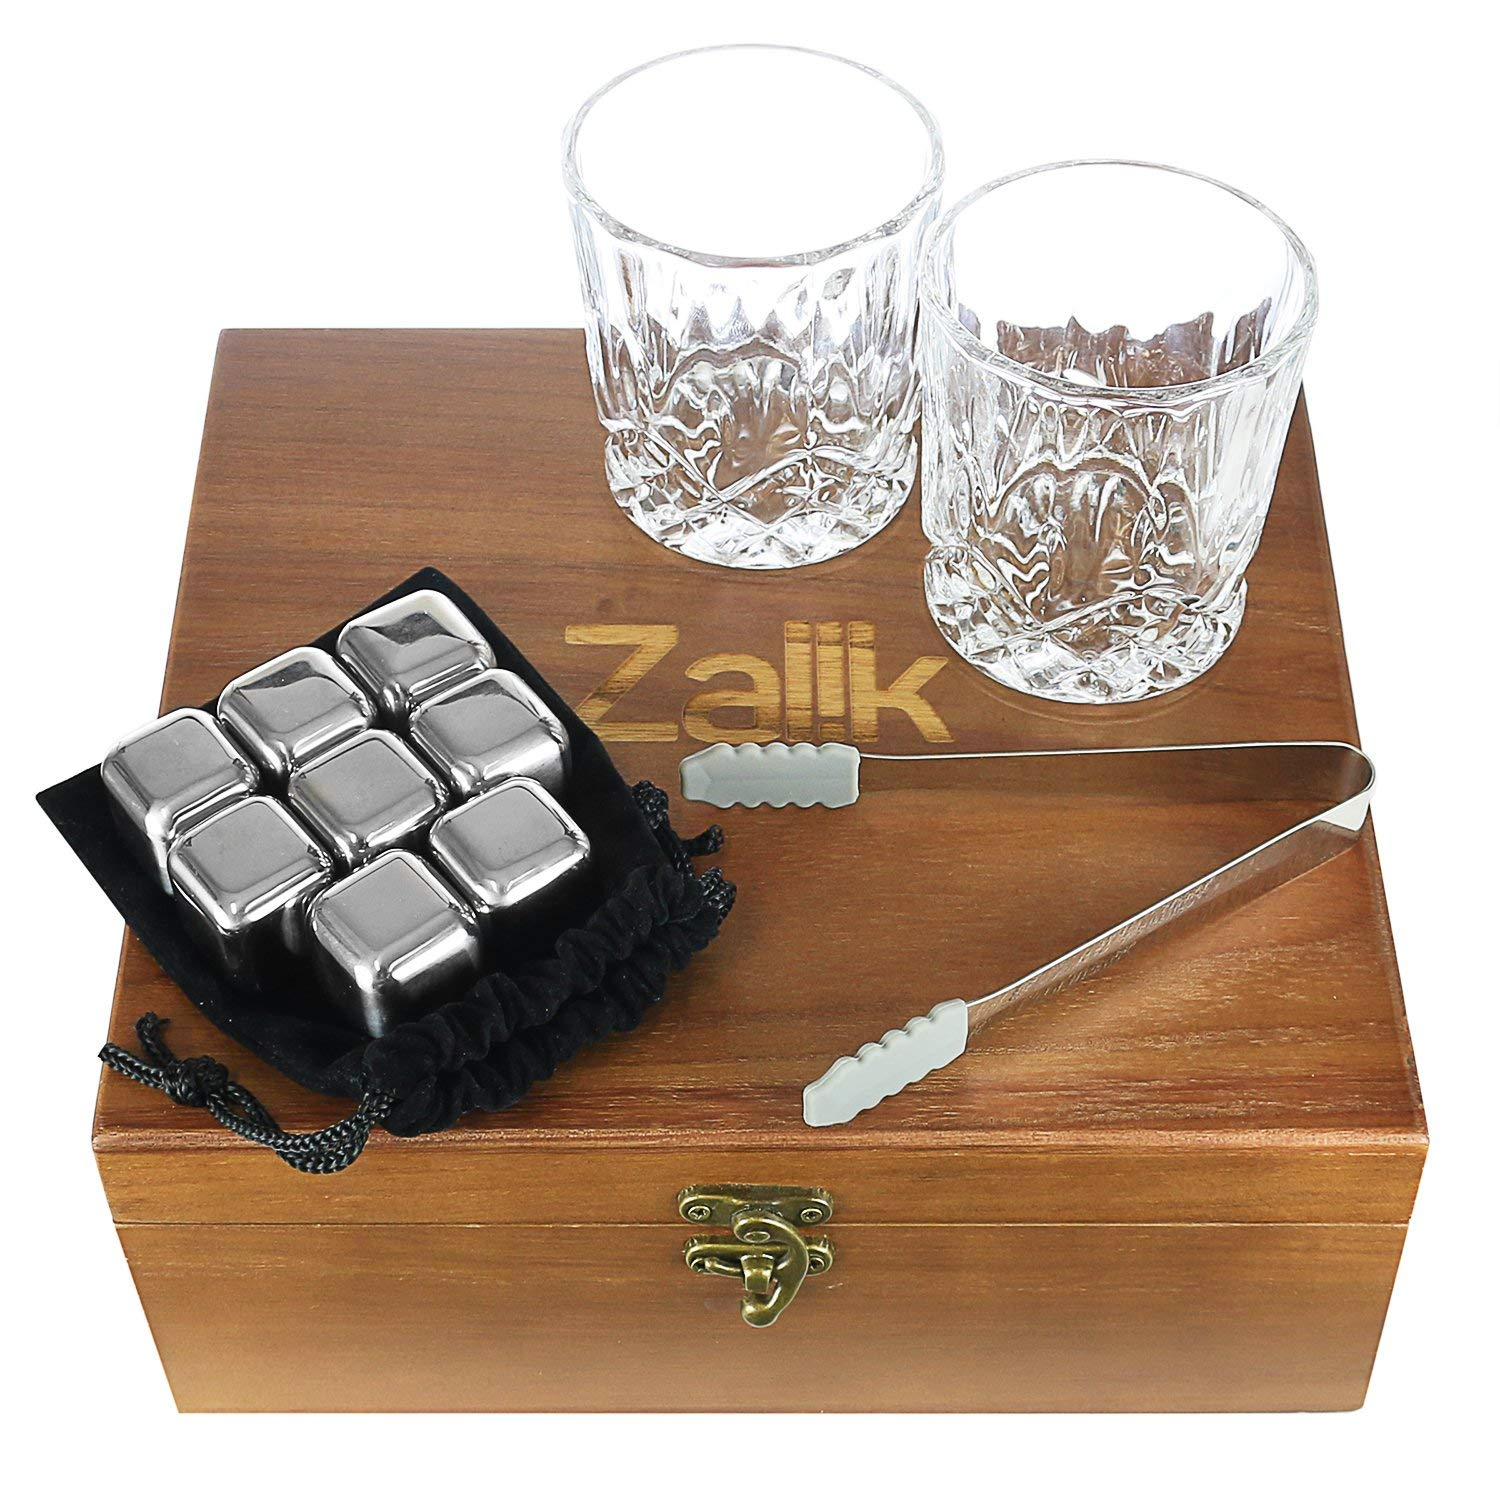 Now that you're wasted, it's time to forget this too-hot day ever happened. Chill your whiskey with this nice set <a href=https://amzn.to/2utI3ju target="_blank" nofollow noreferrer>here.</a>